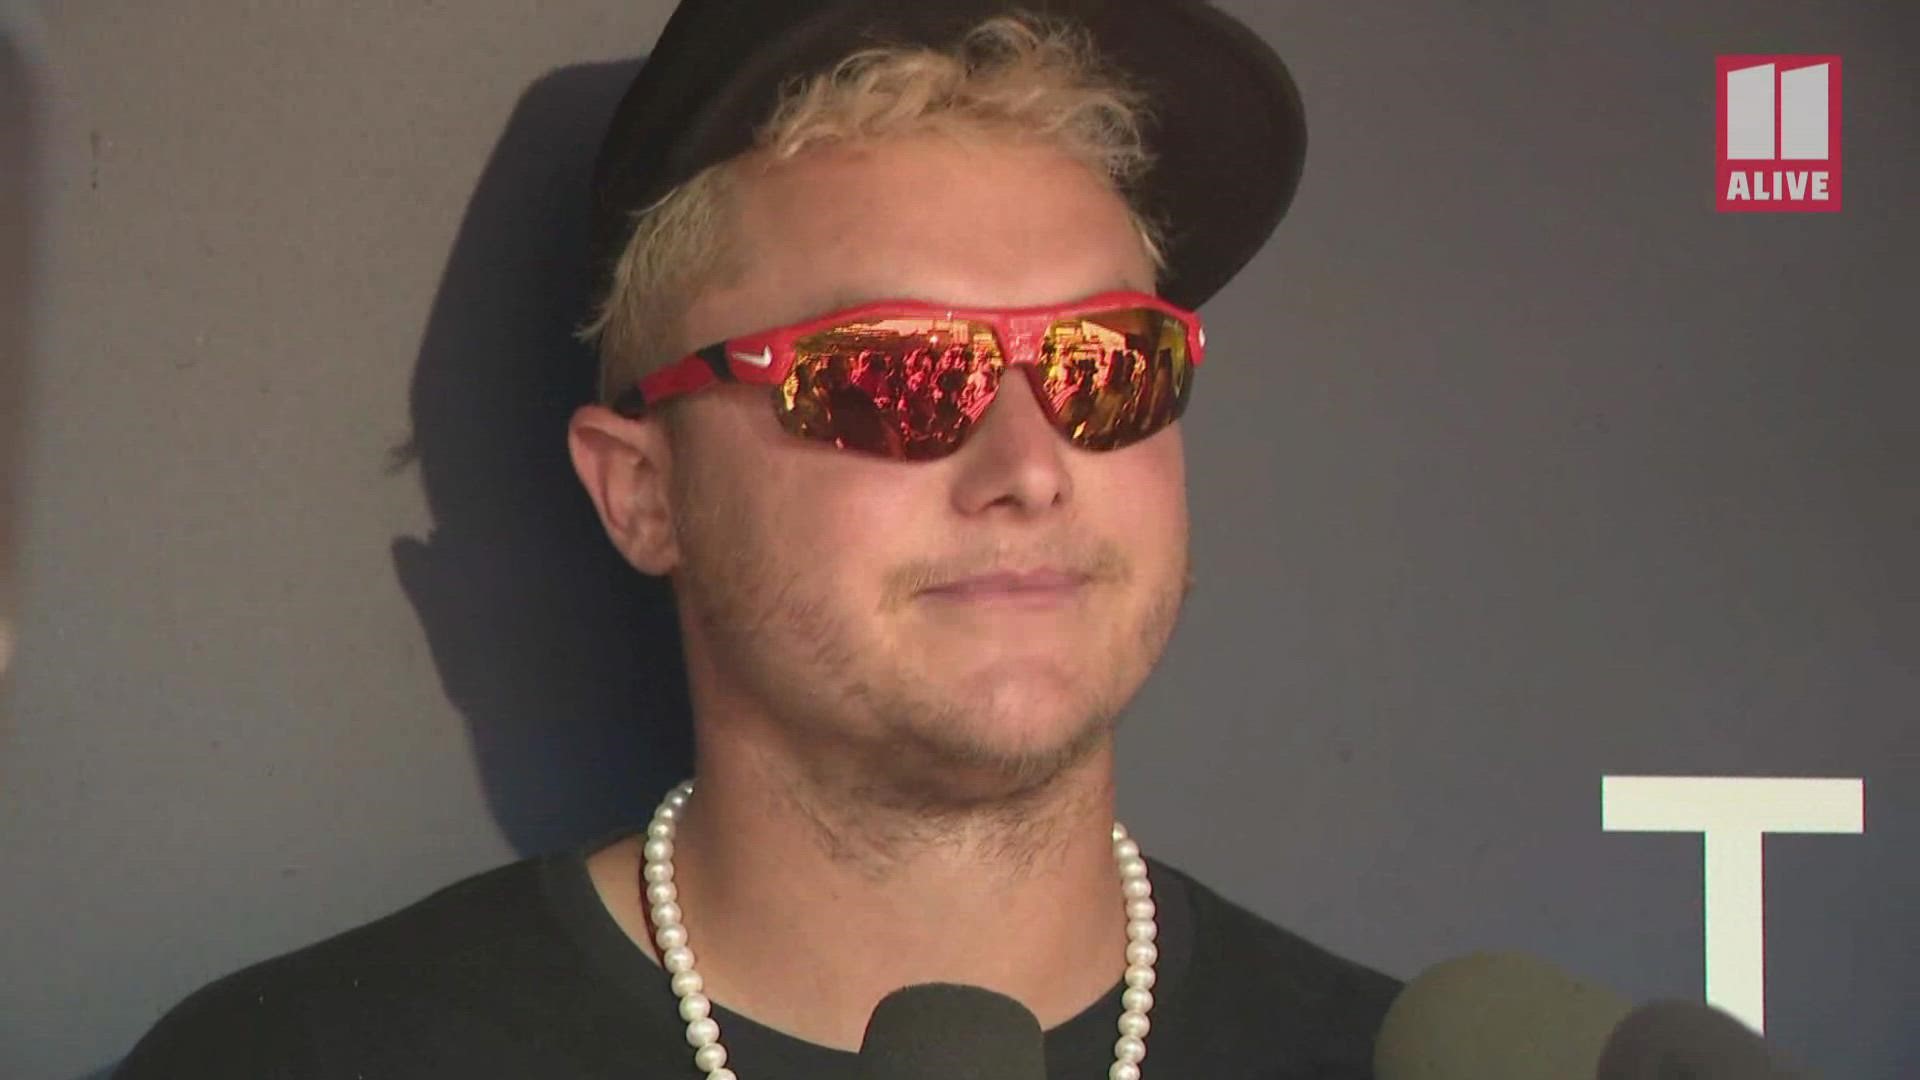 Outfielder Joc Pederson won a championship with the Braves last season and was back in town on Monday with the San Francisco Giants.